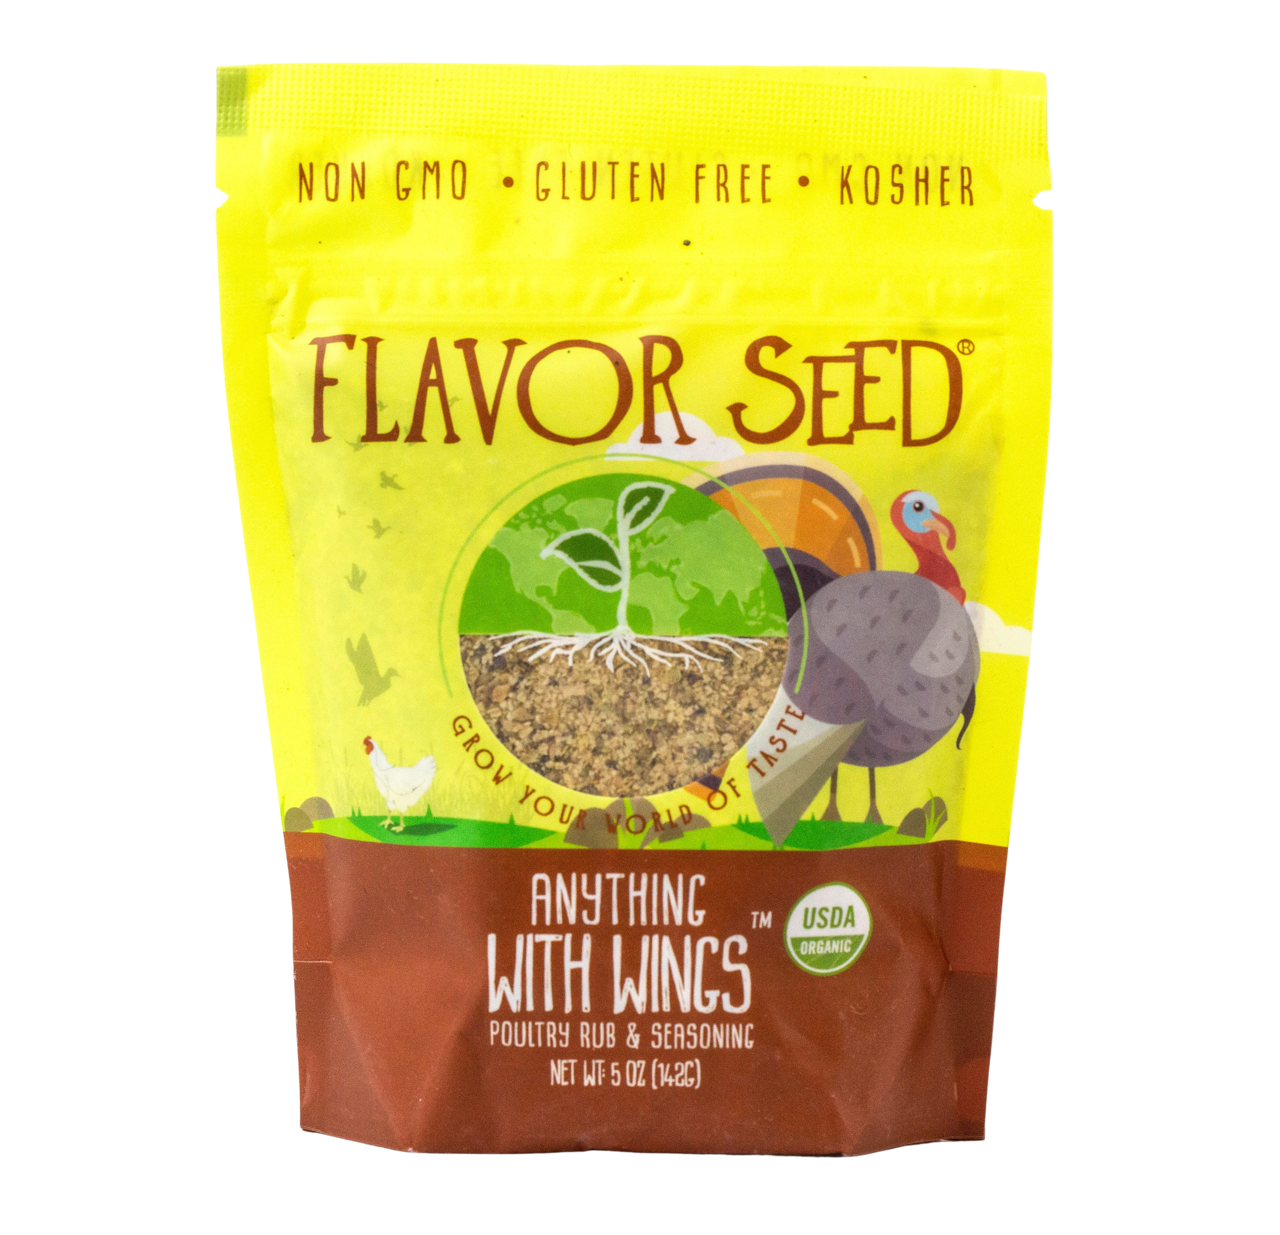 FLAVOR SEED - Anything With Wings Organic Poultry Rub, Dust and Seasoning - Flavor Seed